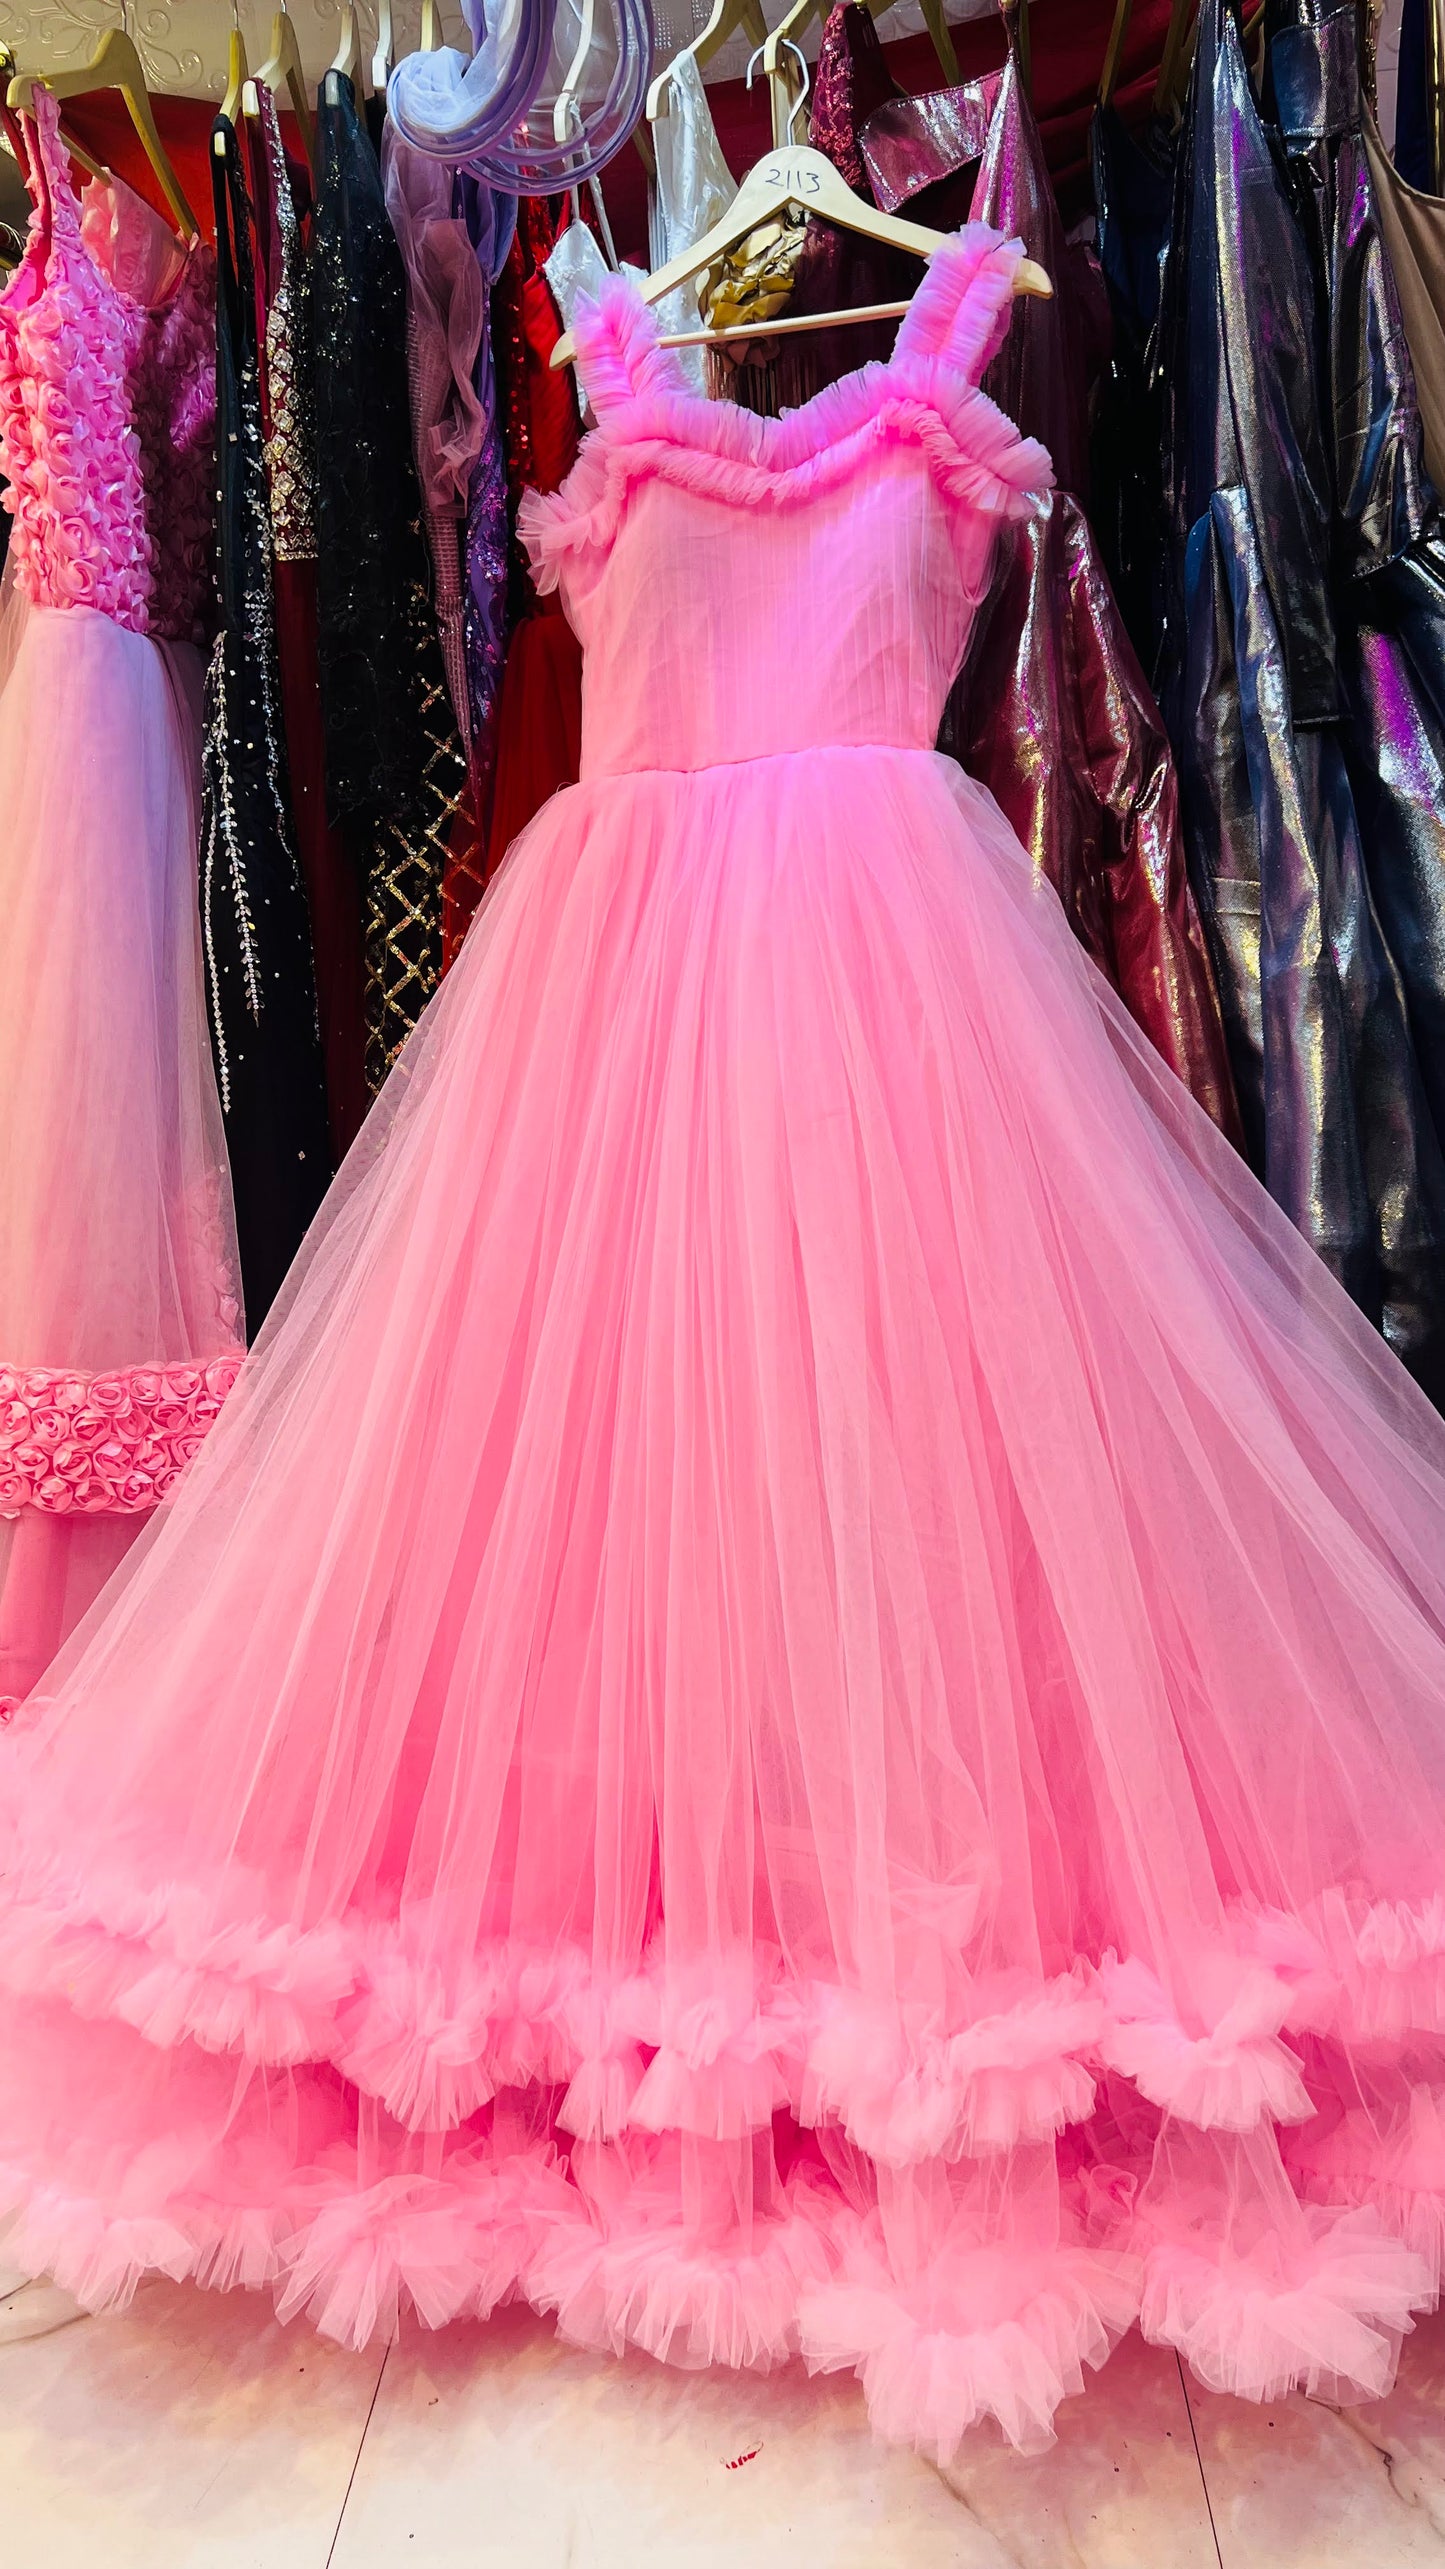 2 LAYER FRILL GOWN